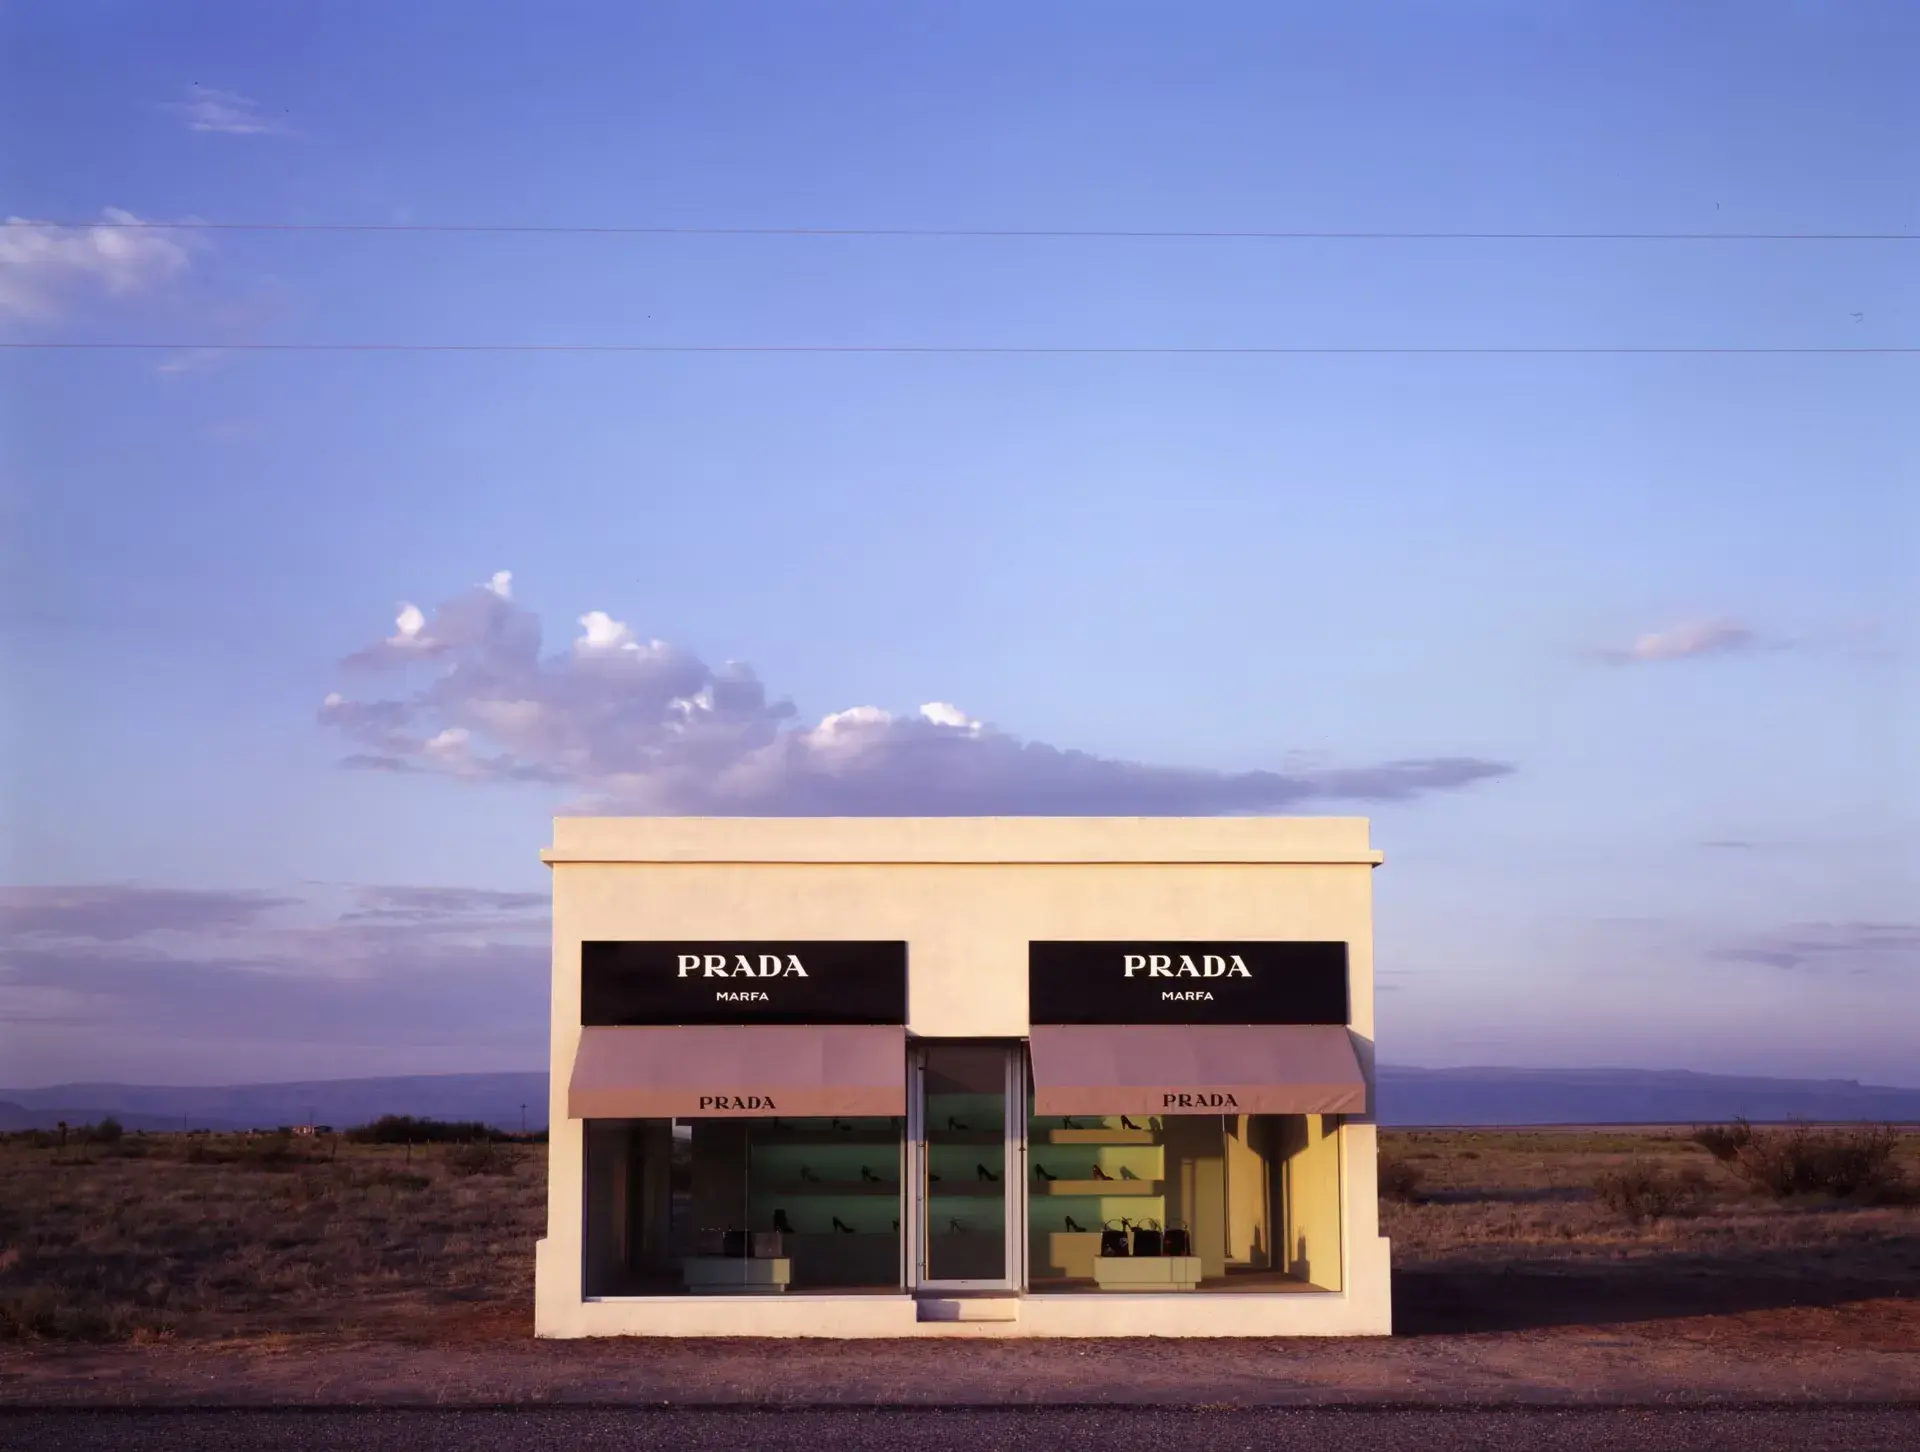 Prada storefront on the side of the road